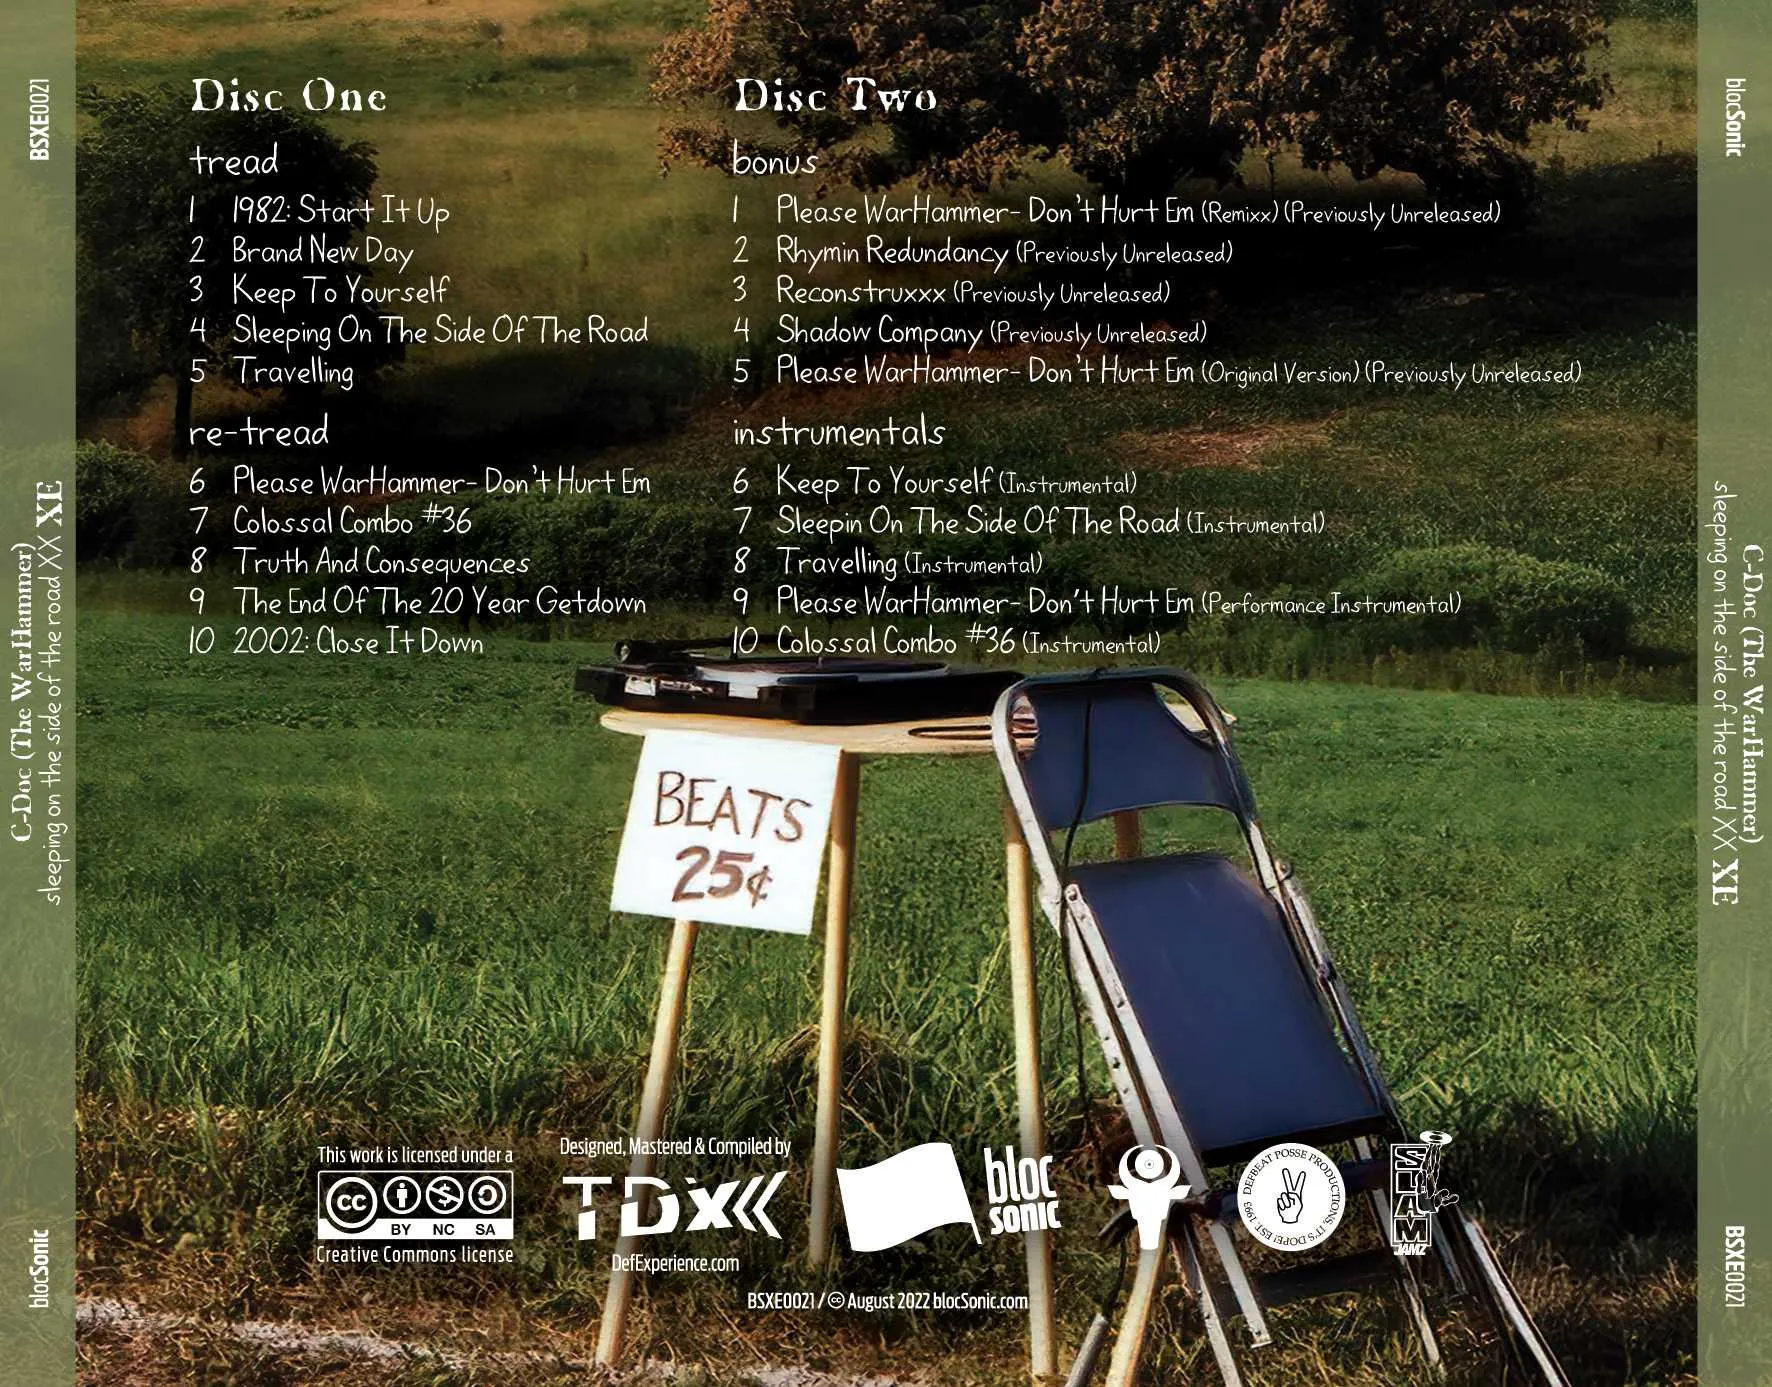 Album traycard for “Sleeping On The Side Of The Road XX XE” by C-Doc